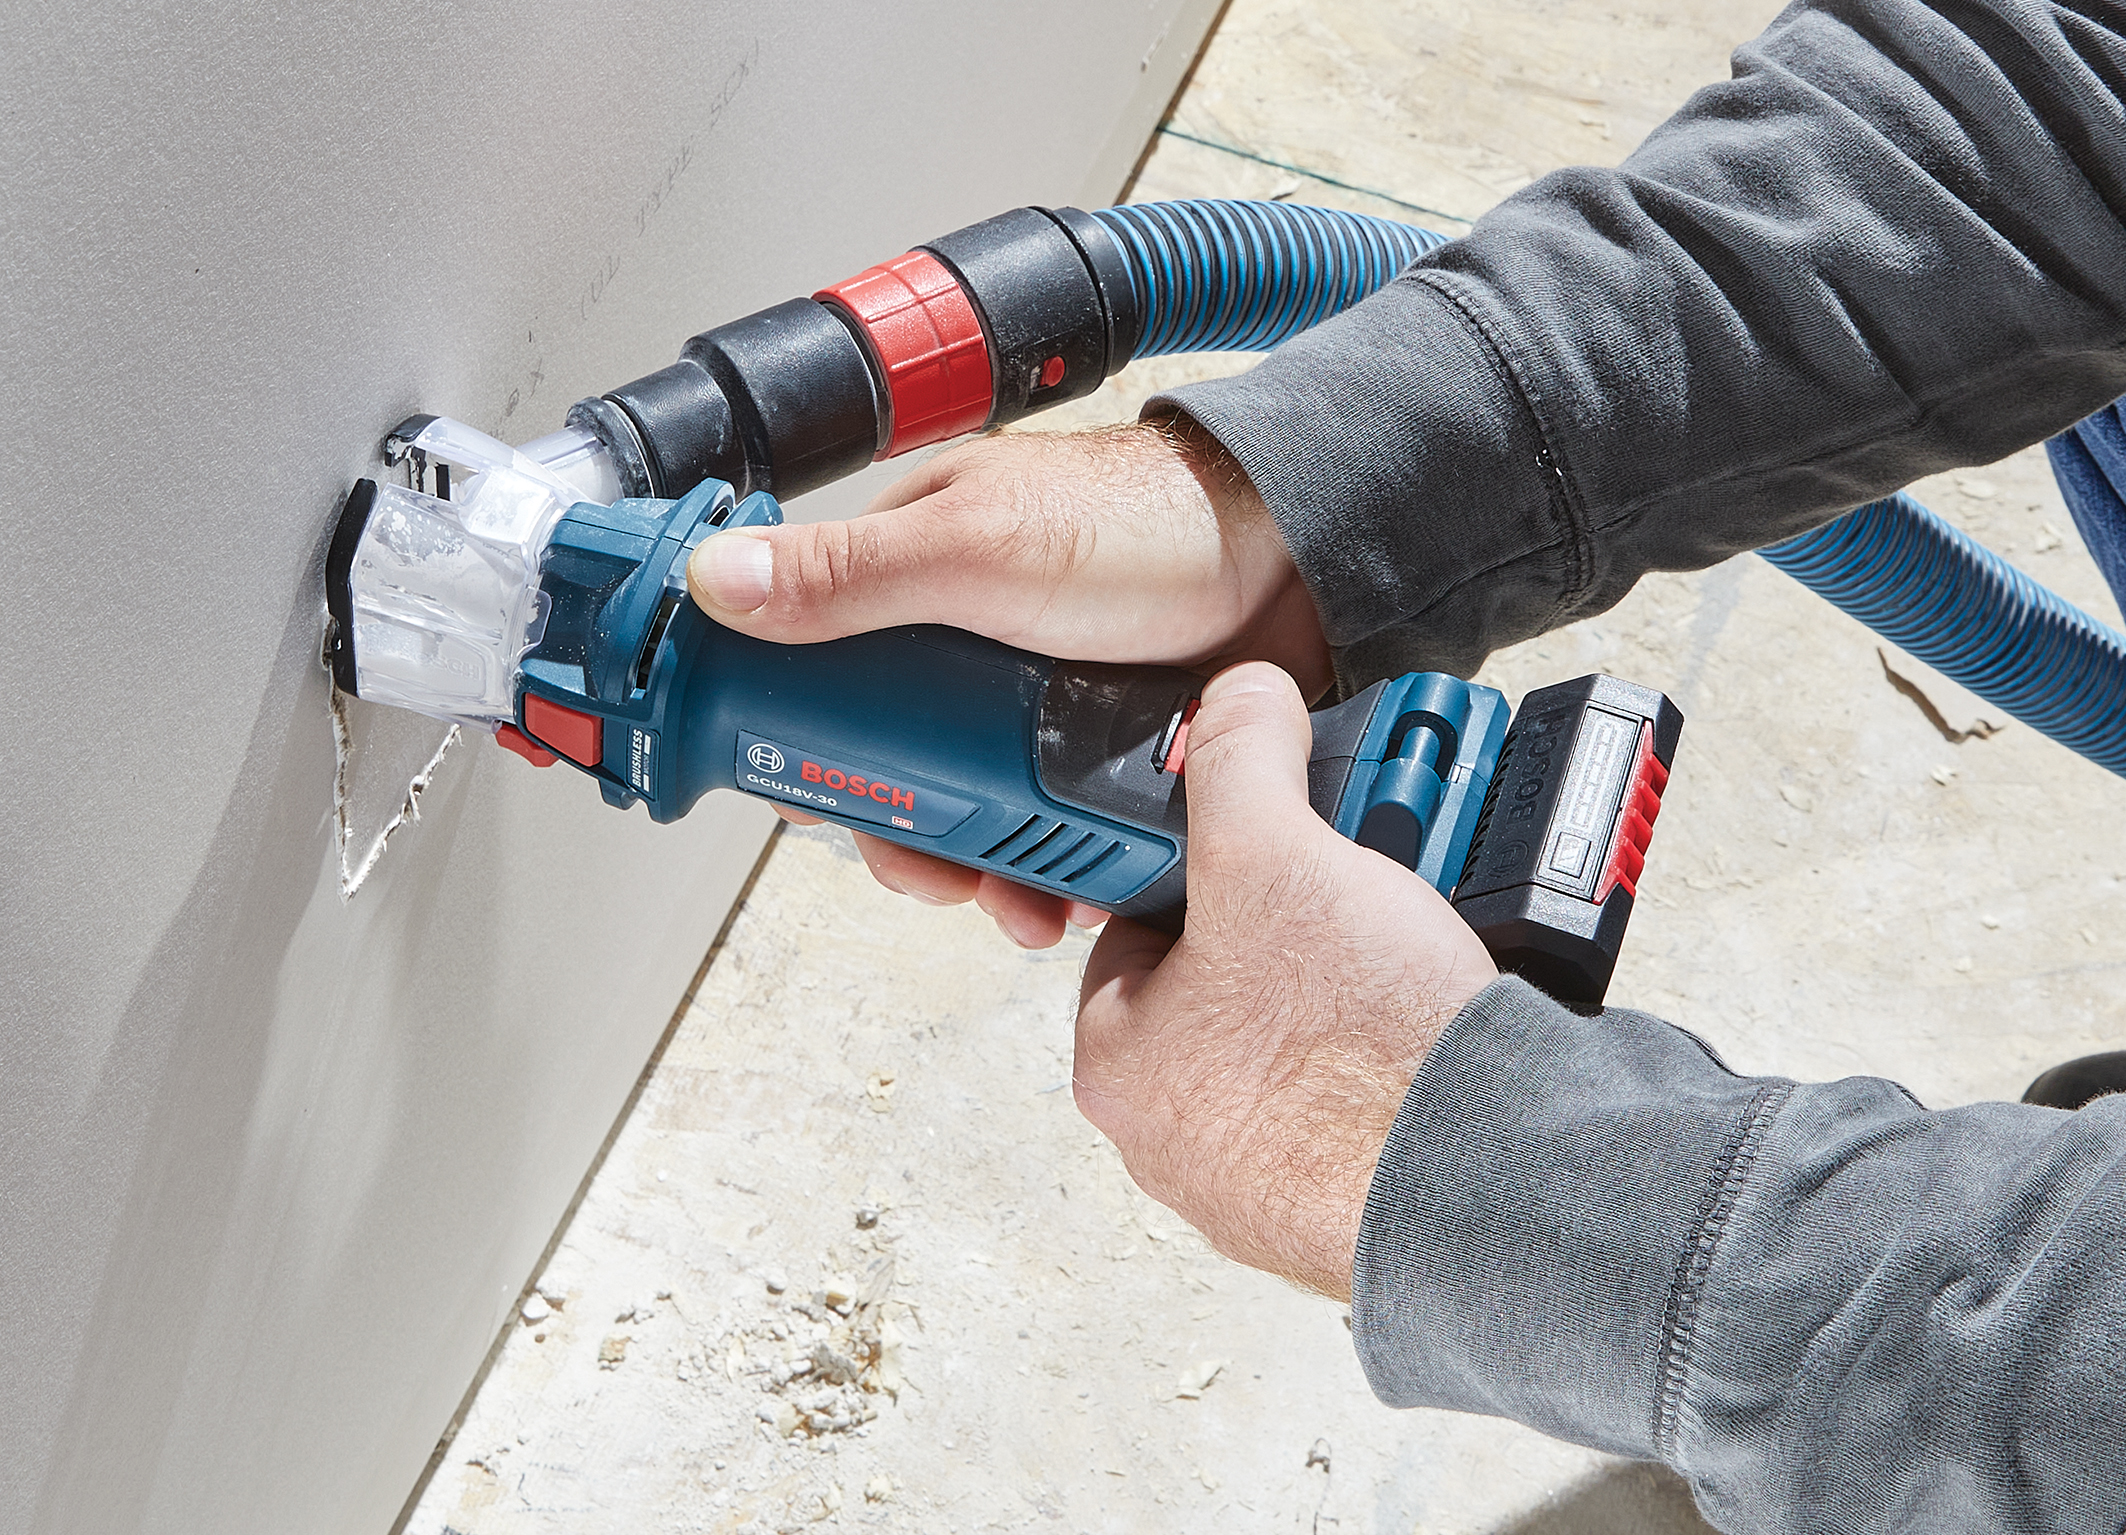 Safer sawing: GCU 18V-30 Professional cordless cut-out tool from Bosch for professionals